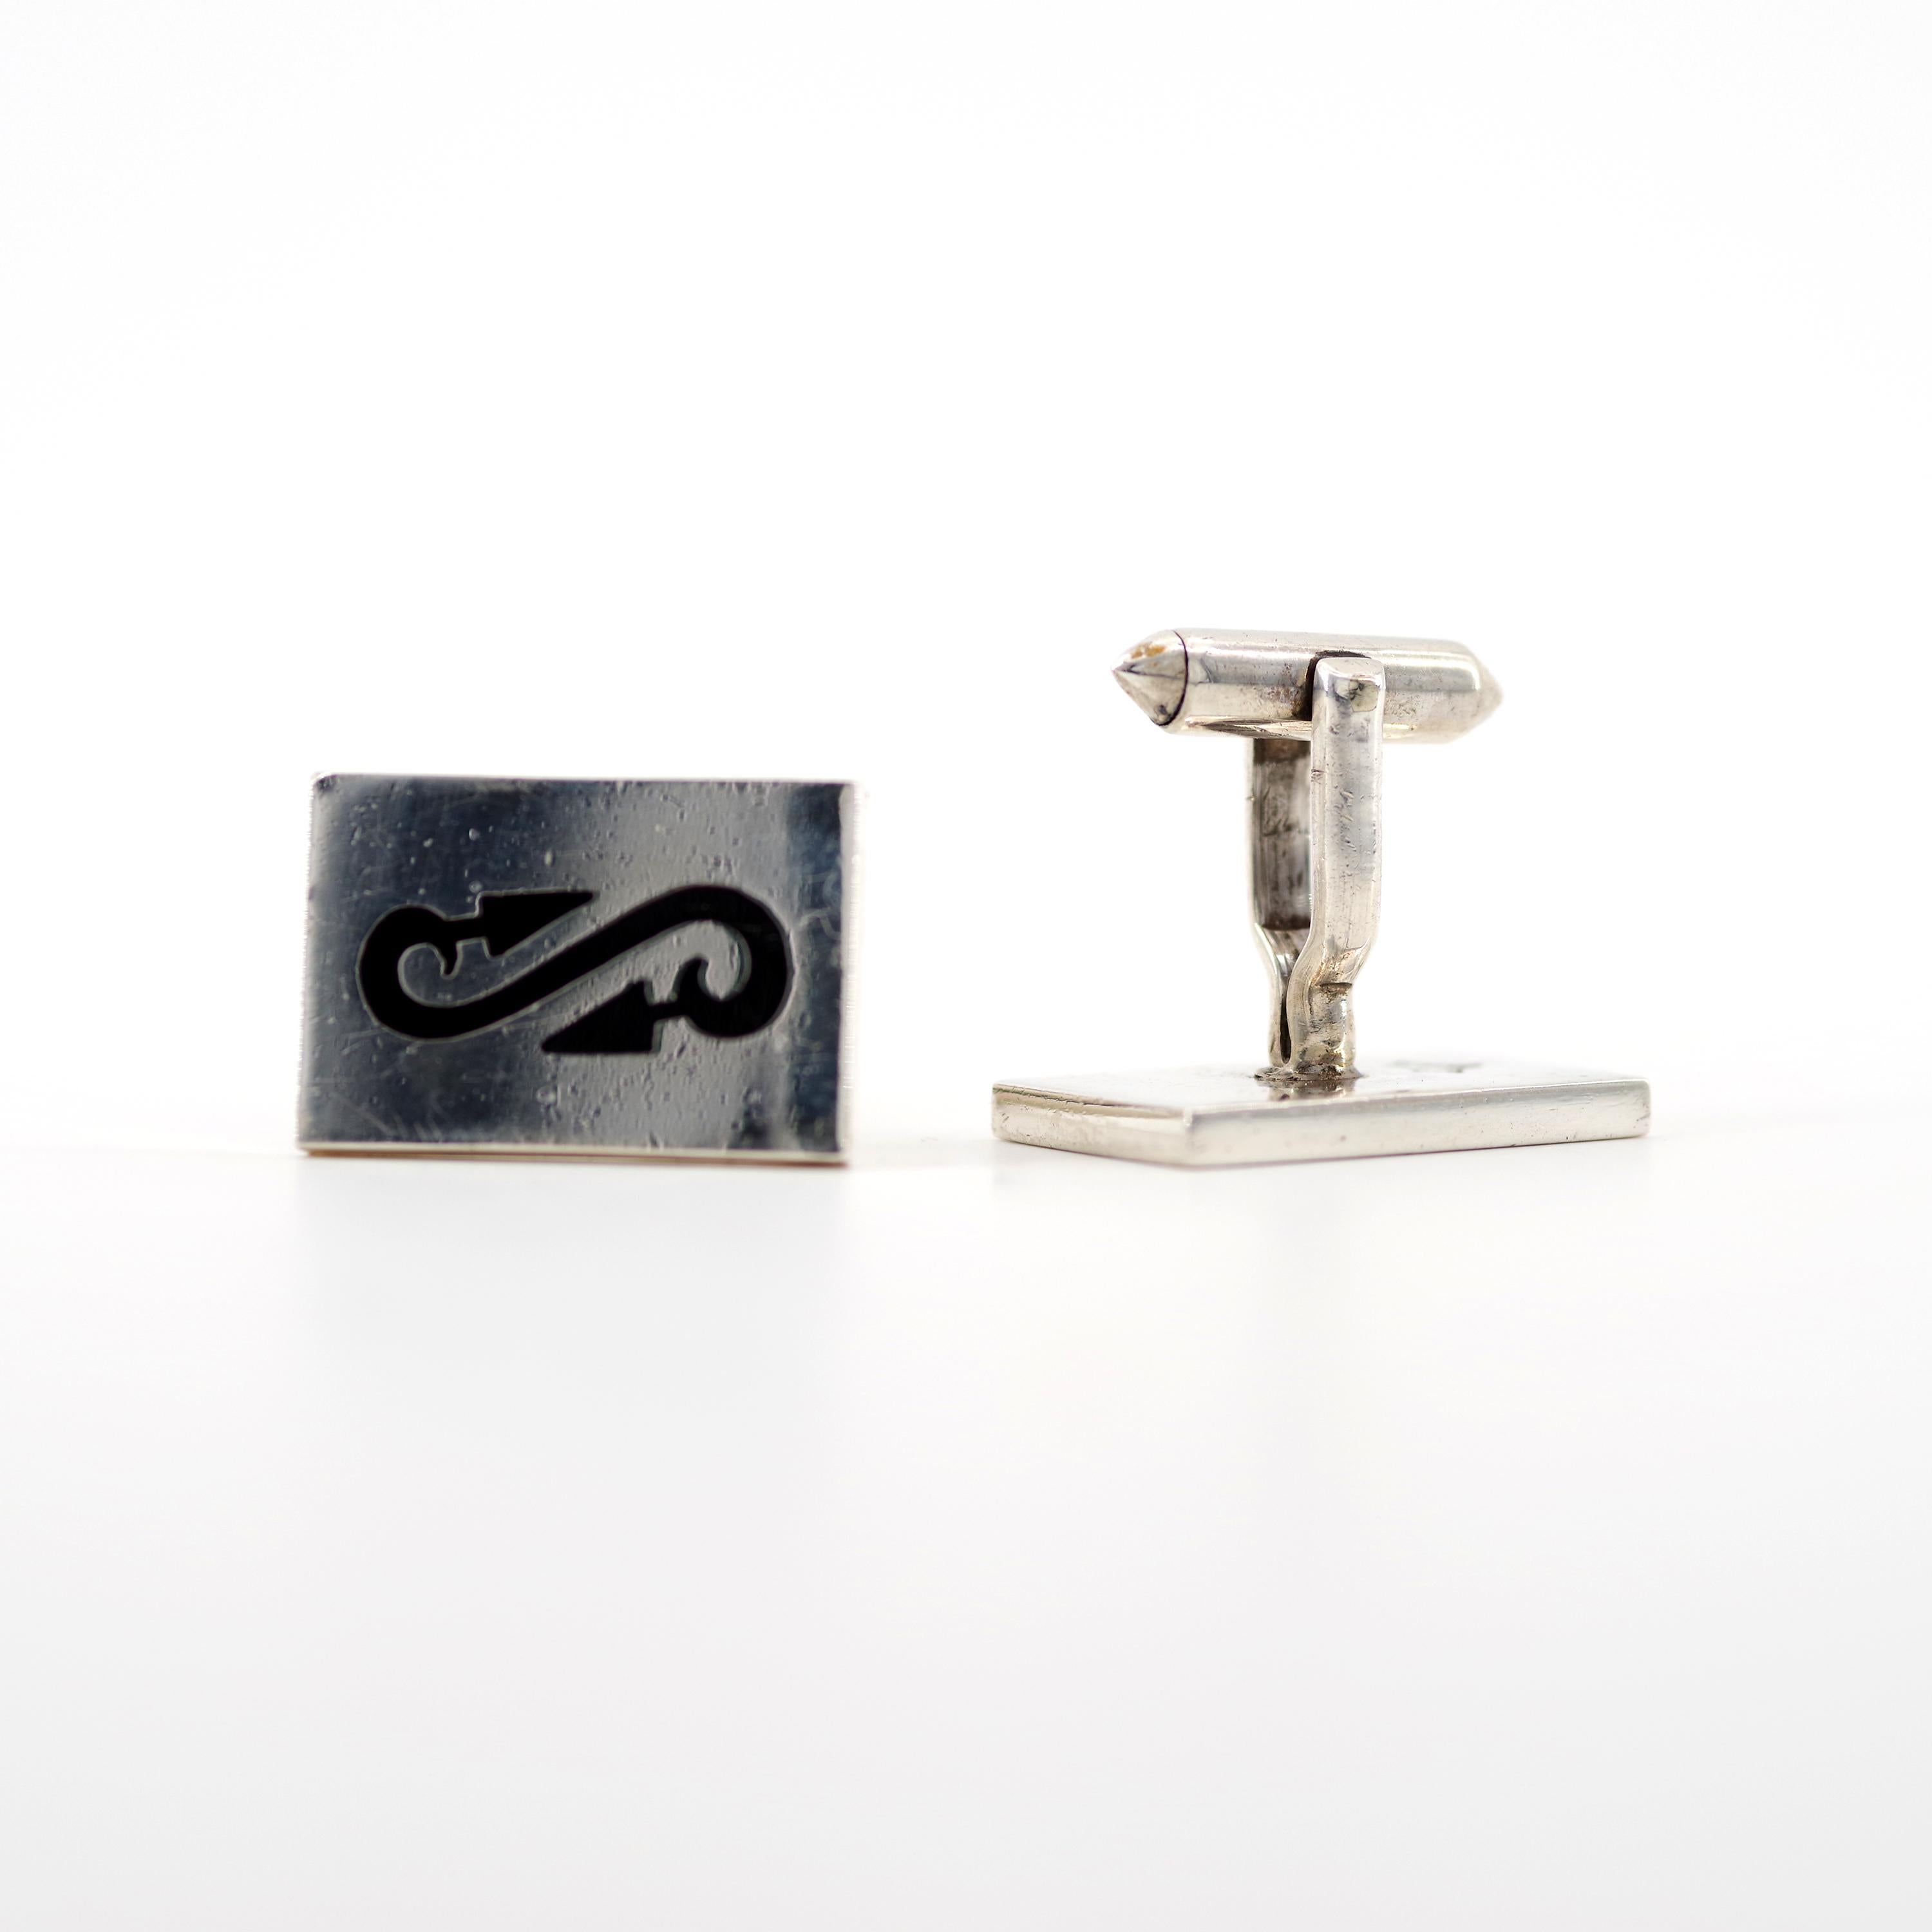 Women's or Men's Antonio Pineda Silver Taxco Cufflinks with Inset Onyx is Uncommon, Pair